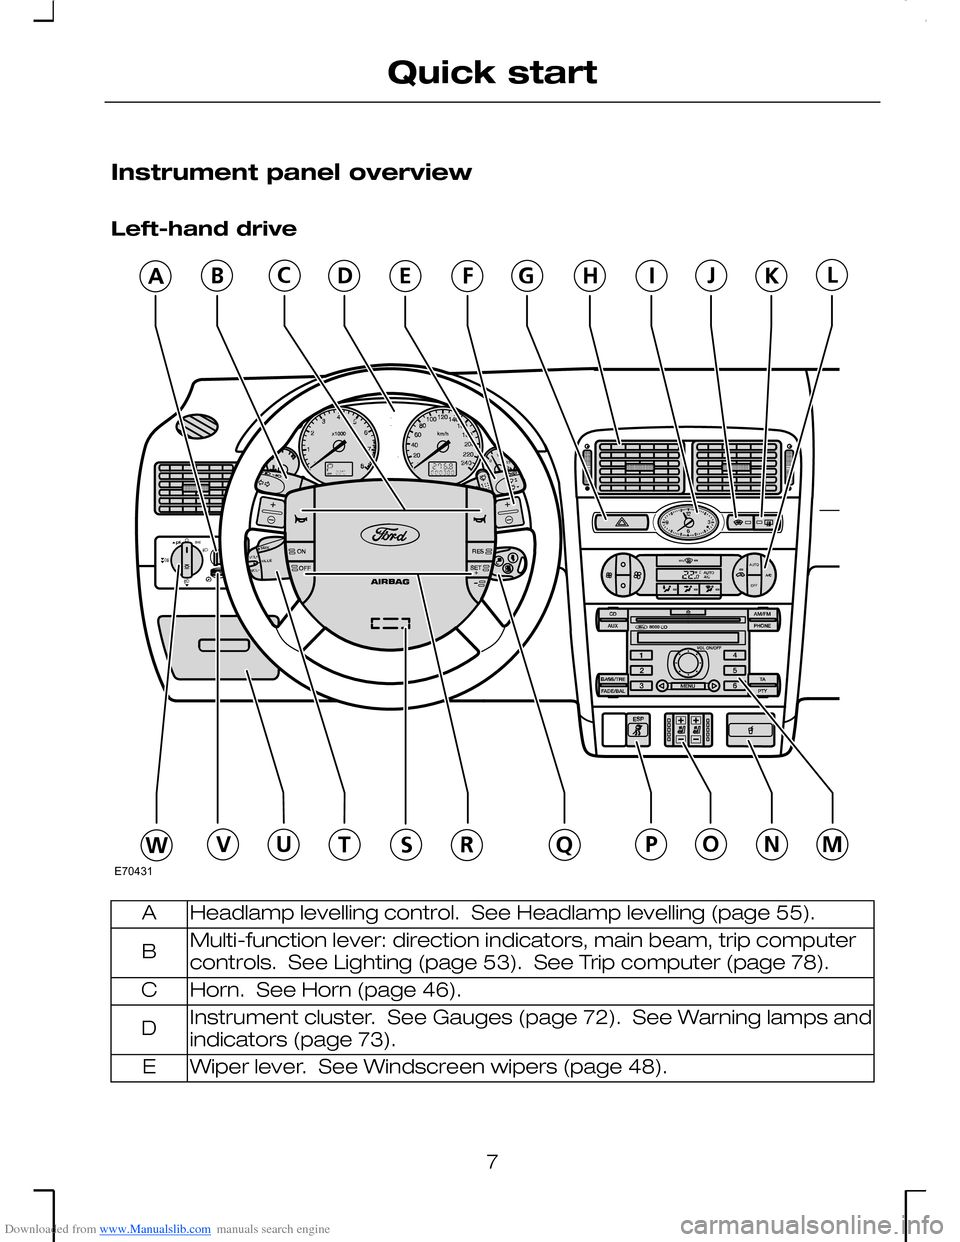 FORD MONDEO 2006 2.G Owners Manual Downloaded from www.Manualslib.com manuals search engine Instrument panel overview
Left-hand drive
Headlamp levelling control.  See Headlamp levelling (page 55).A
Multi-function lever: direction indic